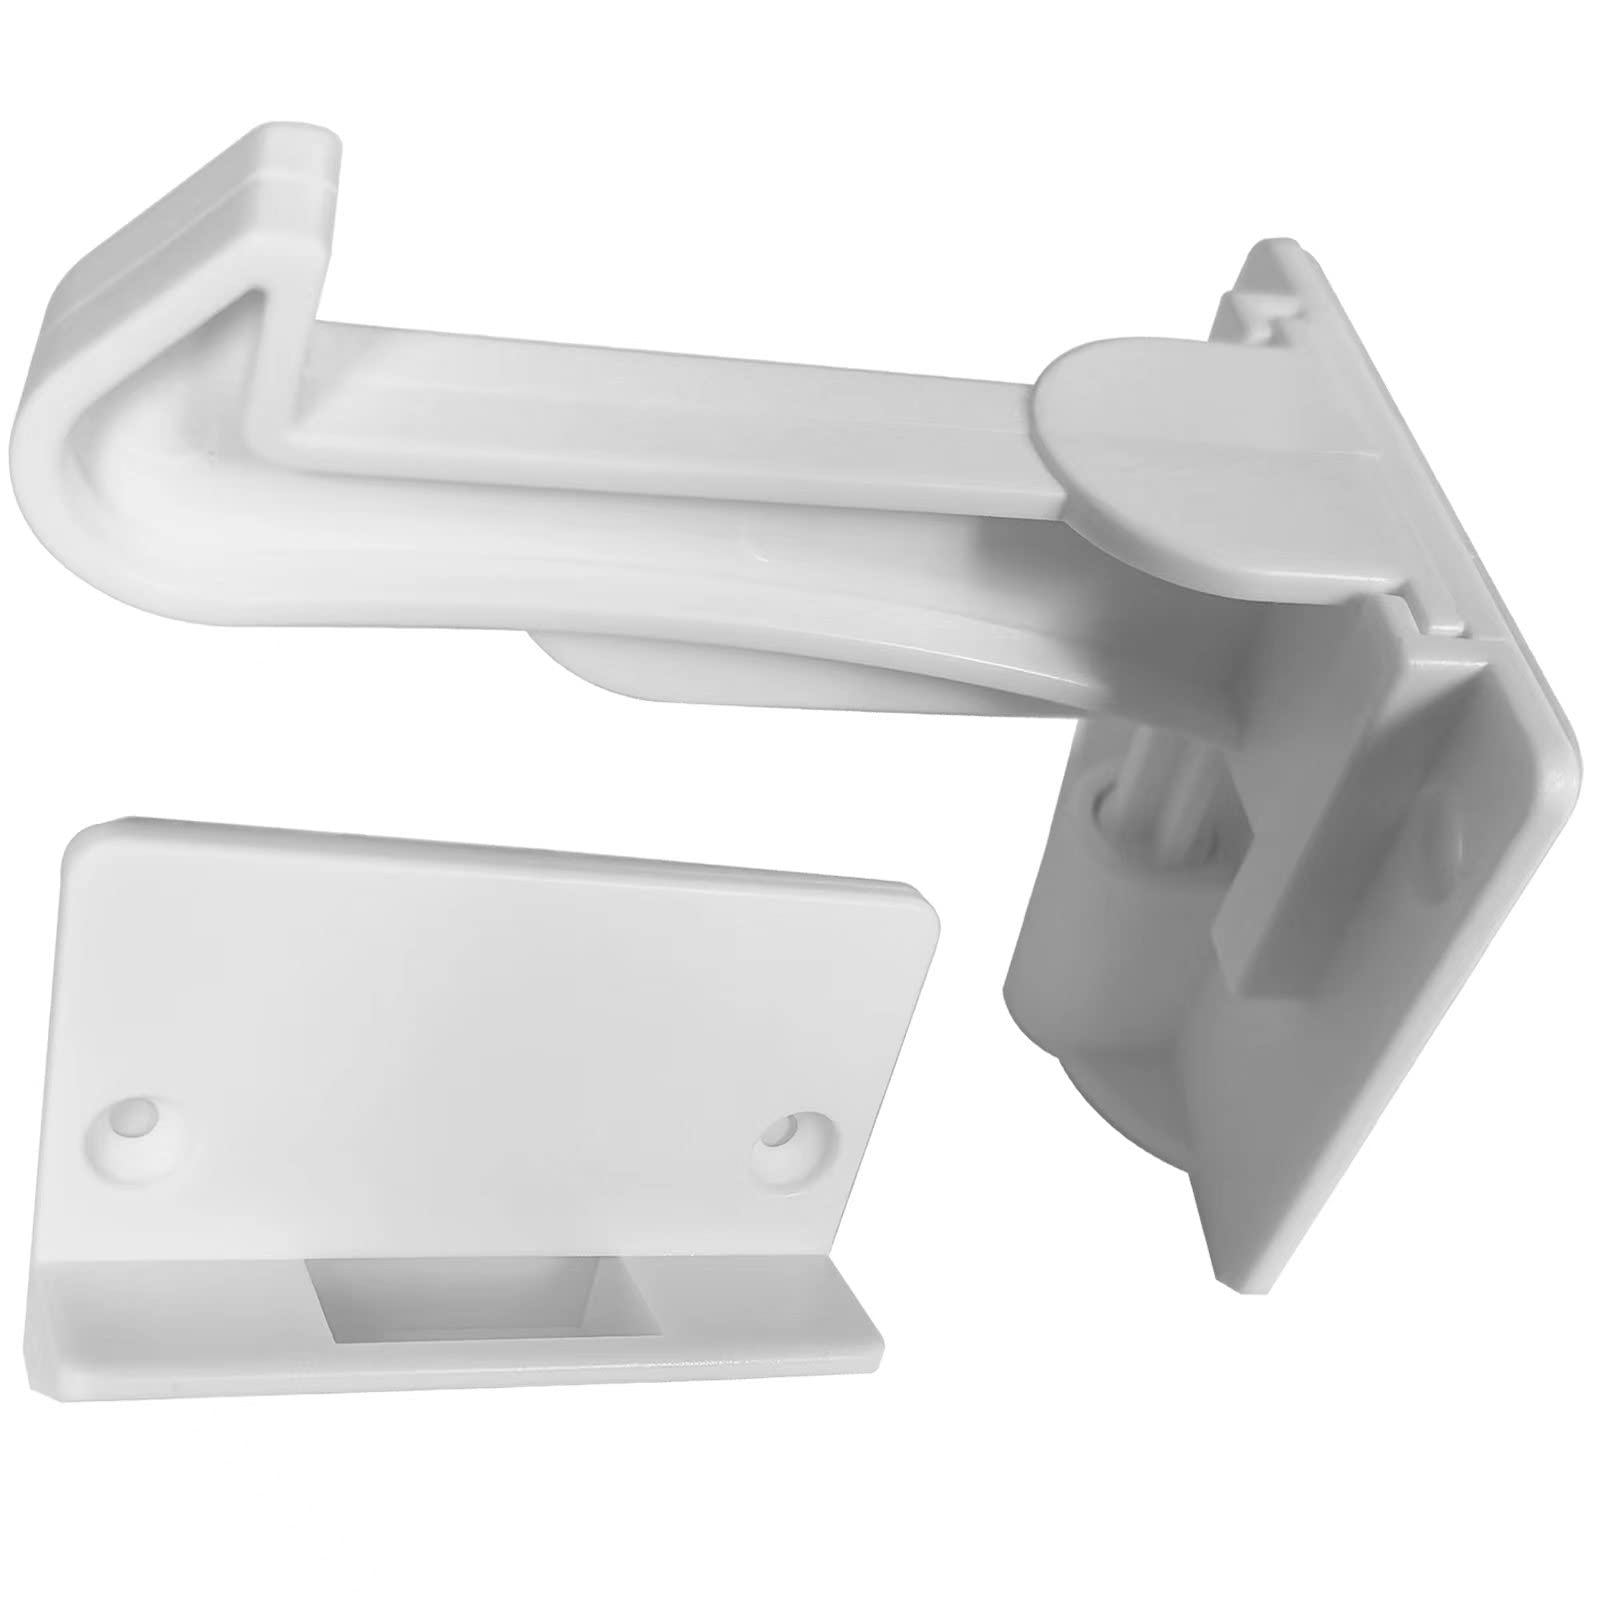 Upgraded Invisible Baby Proofing Cabinet Latch Locks (10 Pack) - No  Drilling or Tools Required for Installation, Works with Most Cabinets and  Drawers